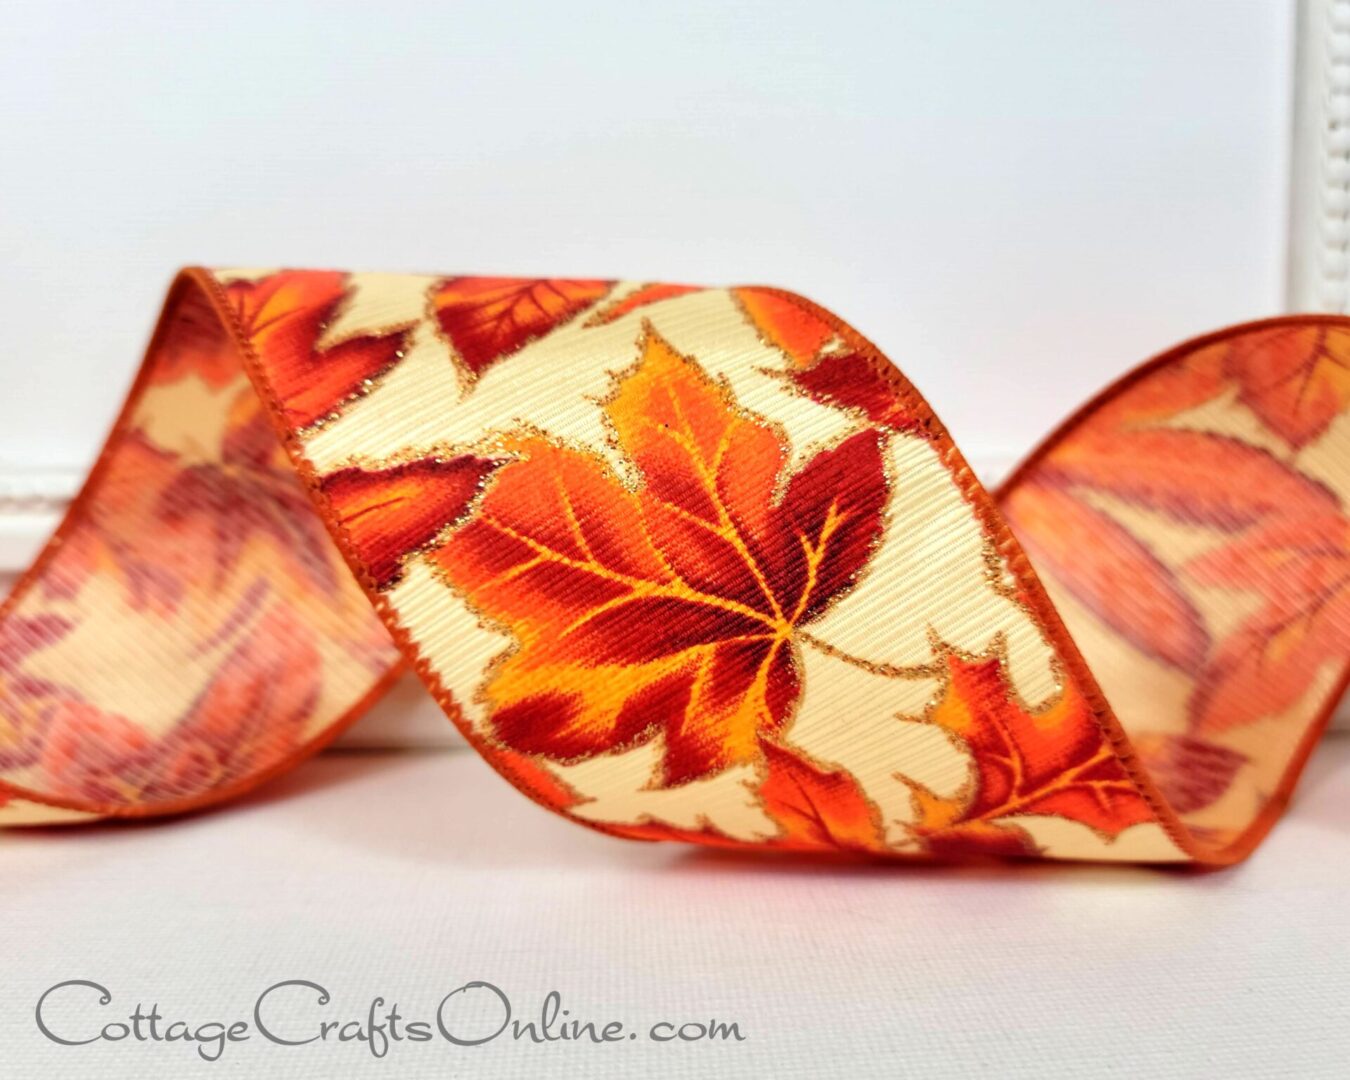 Autumn leaves on ribbed satin with gold glitter 2.5" wide wired ribbon from the Etsy shop of Cottage Crafts Online.